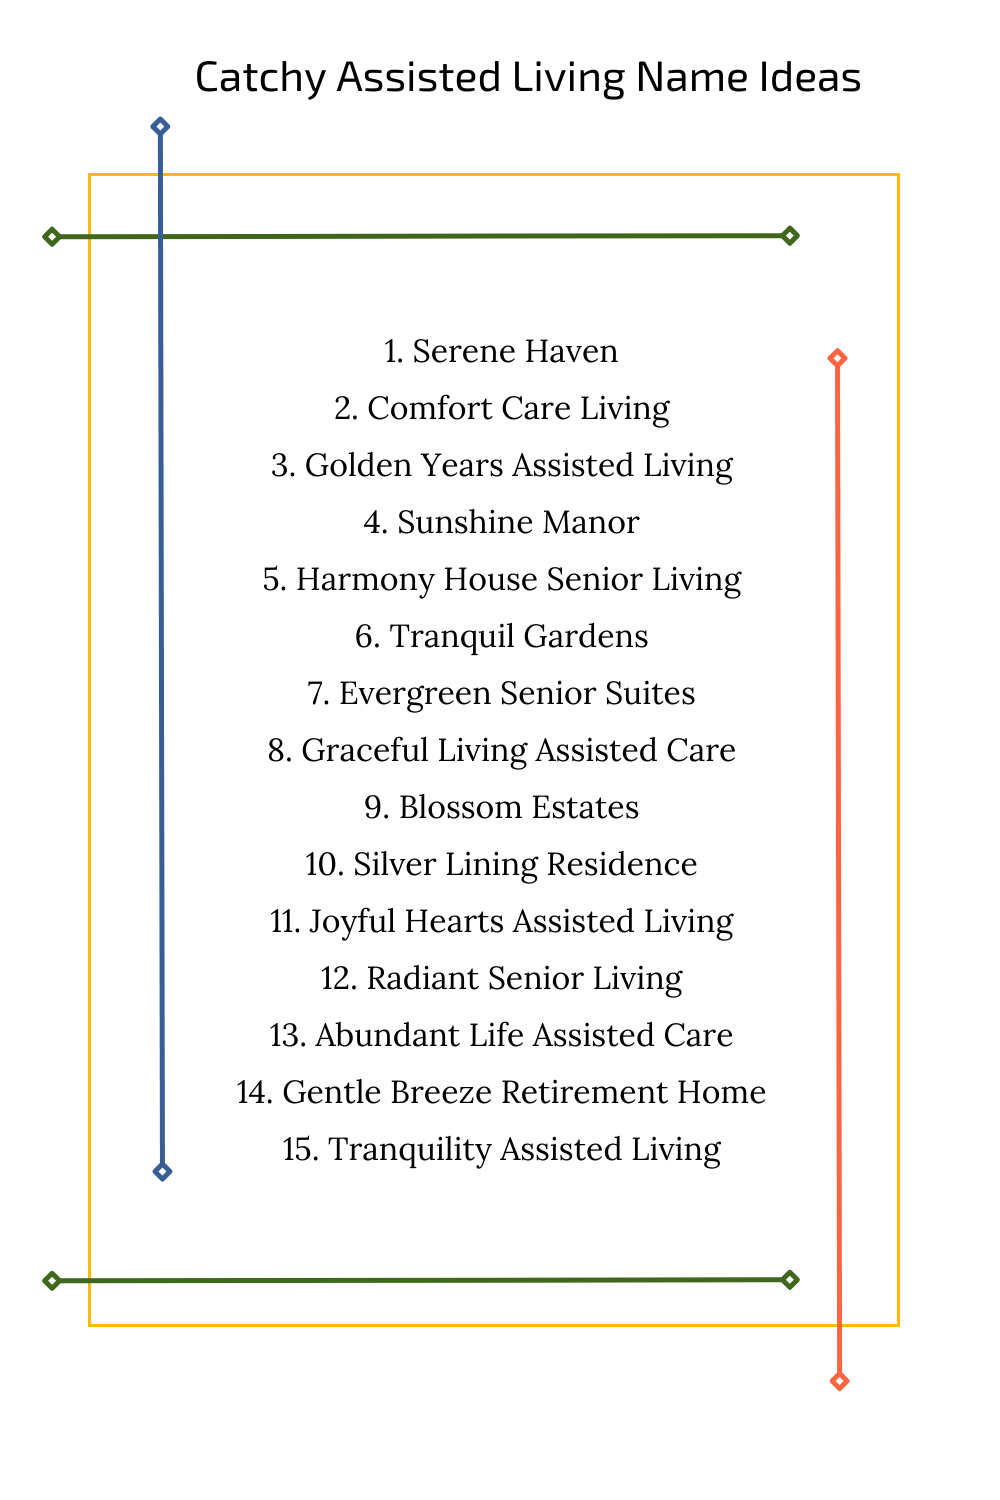 Catchy Assisted Living Name Ideas